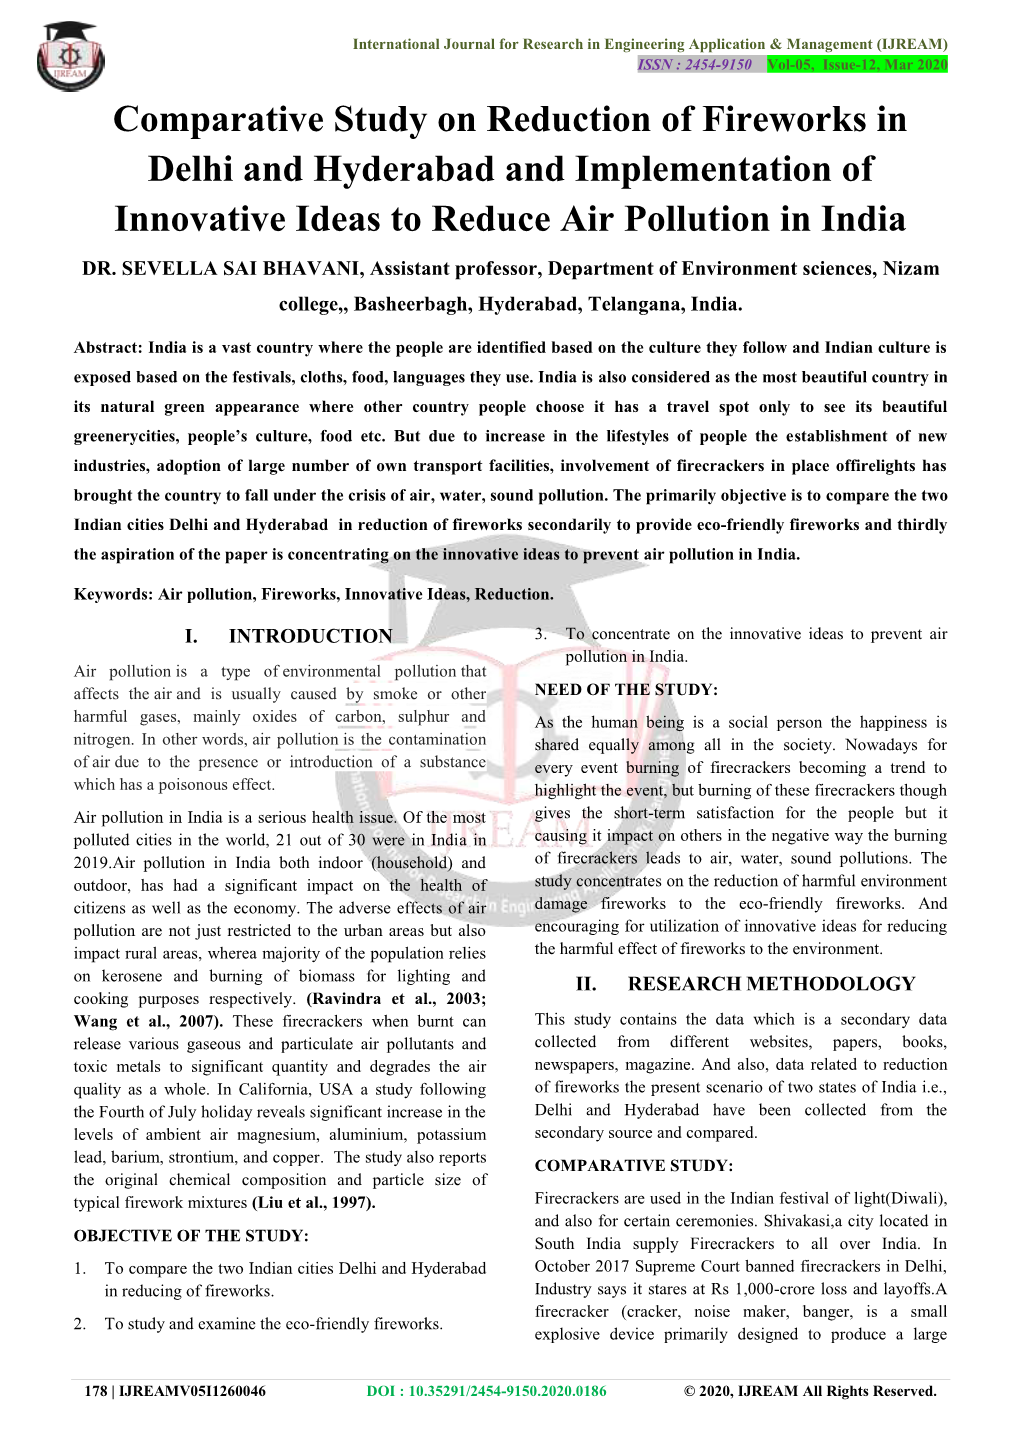 Comparative Study on Reduction of Fireworks in Delhi and Hyderabad and Implementation of Innovative Ideas to Reduce Air Pollution in India DR